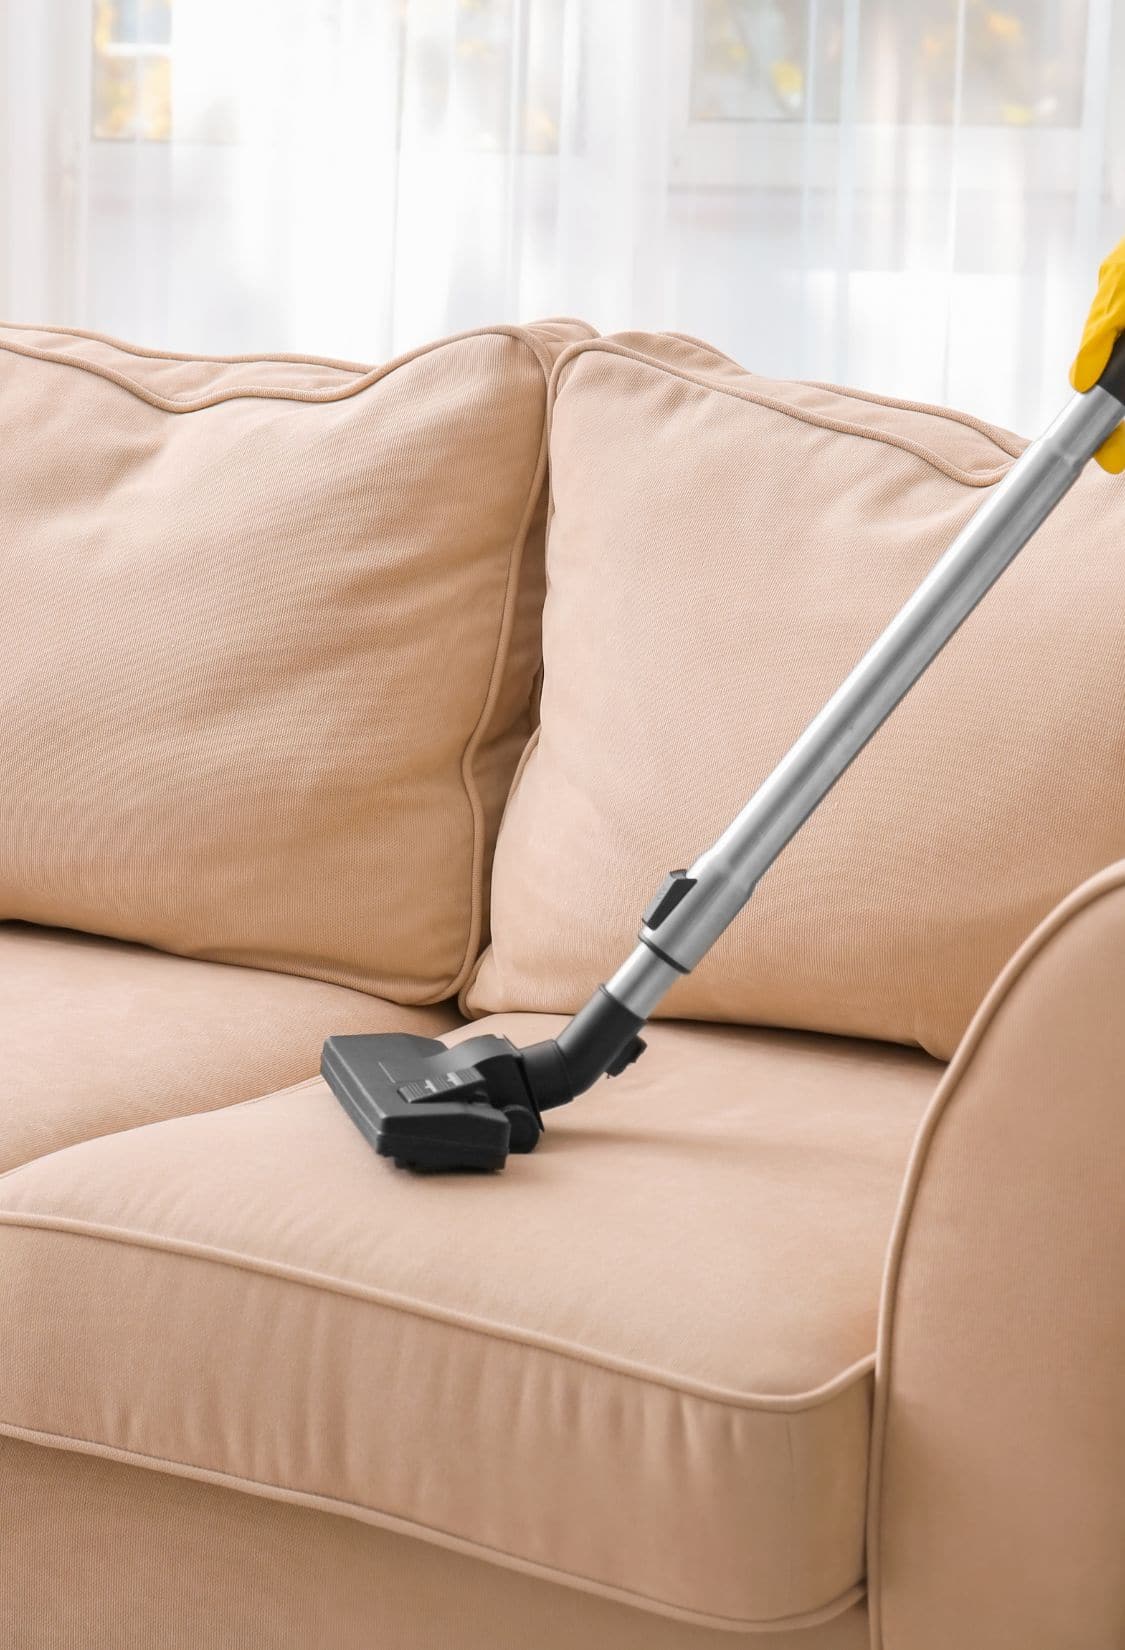 1 Carpet Cleaning Upholstery Cleaning Individual sections Sliders